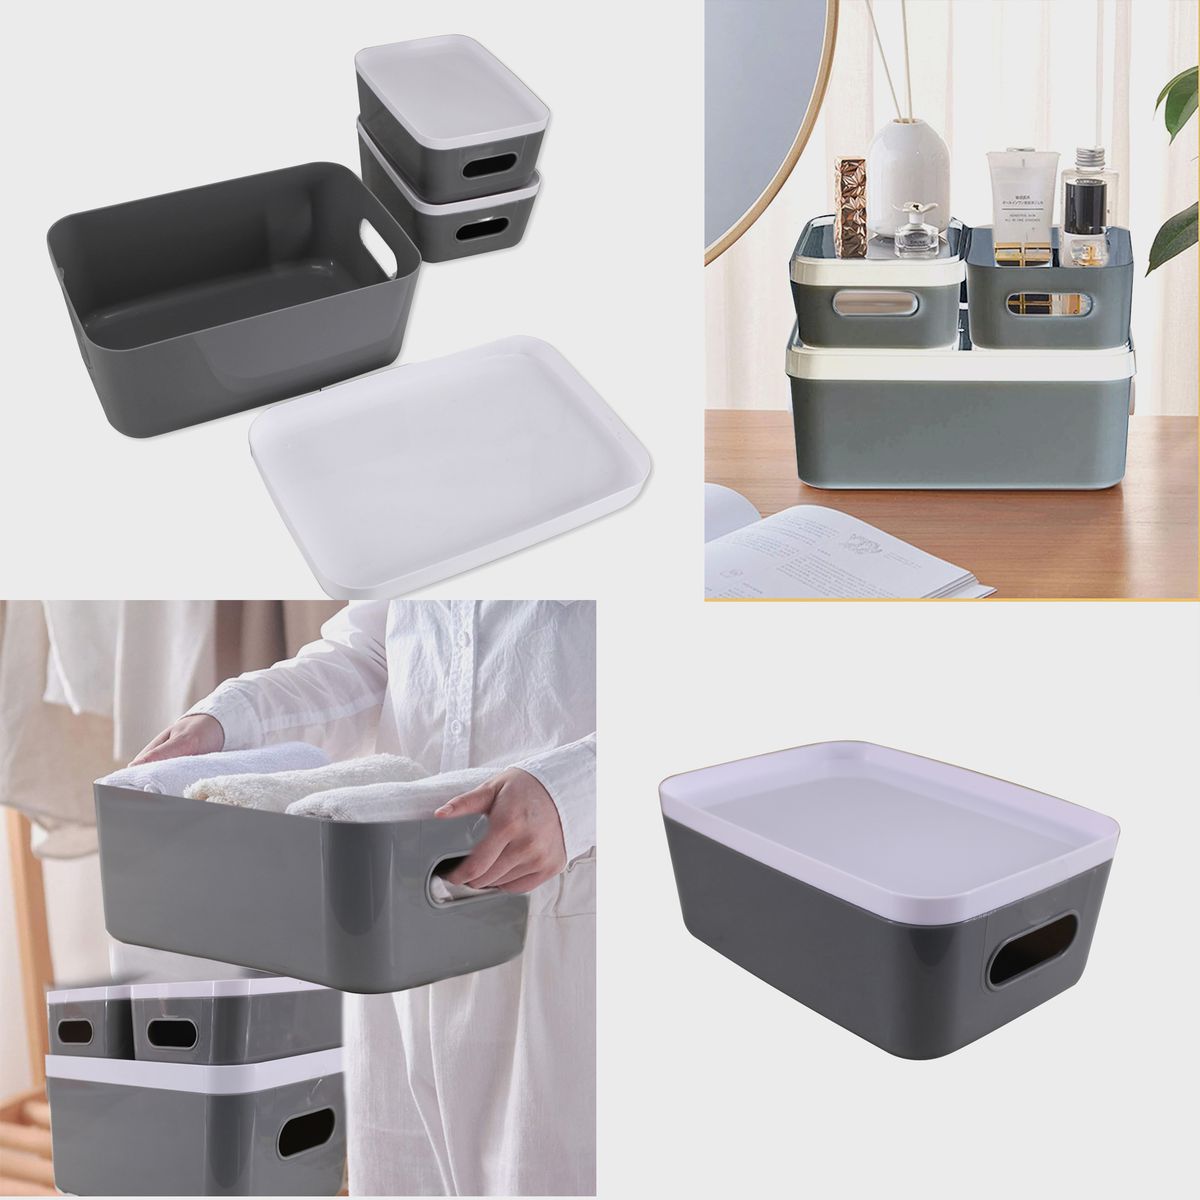 3 Piece Multifunction Bed Bath & Kitchen Stoarge Bins with Deep Dish Lids